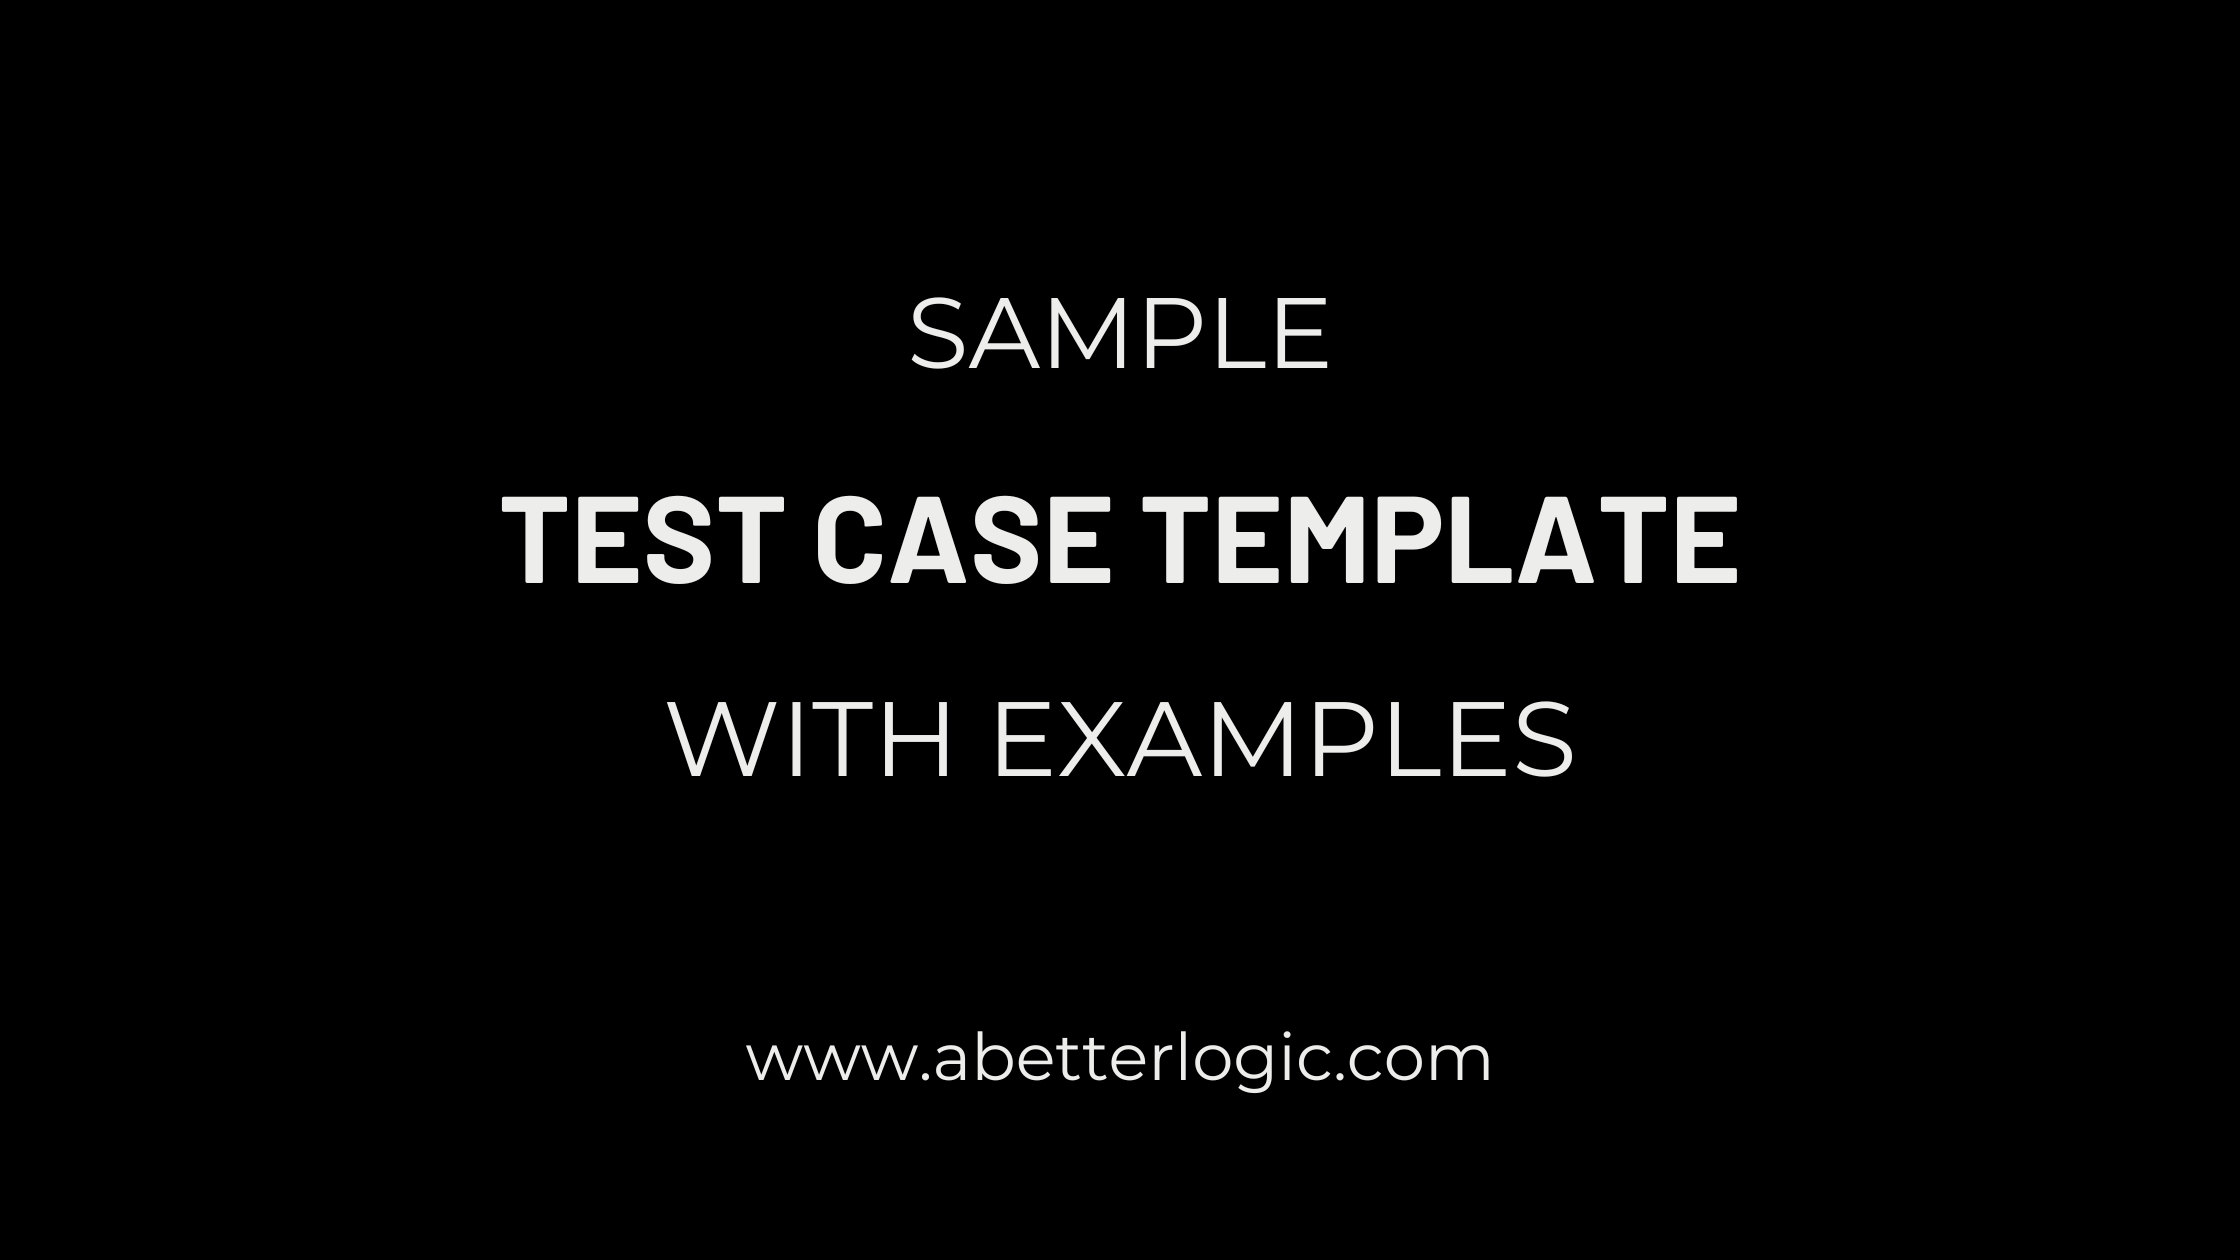 Sample Test Case Template With Test Case Examples